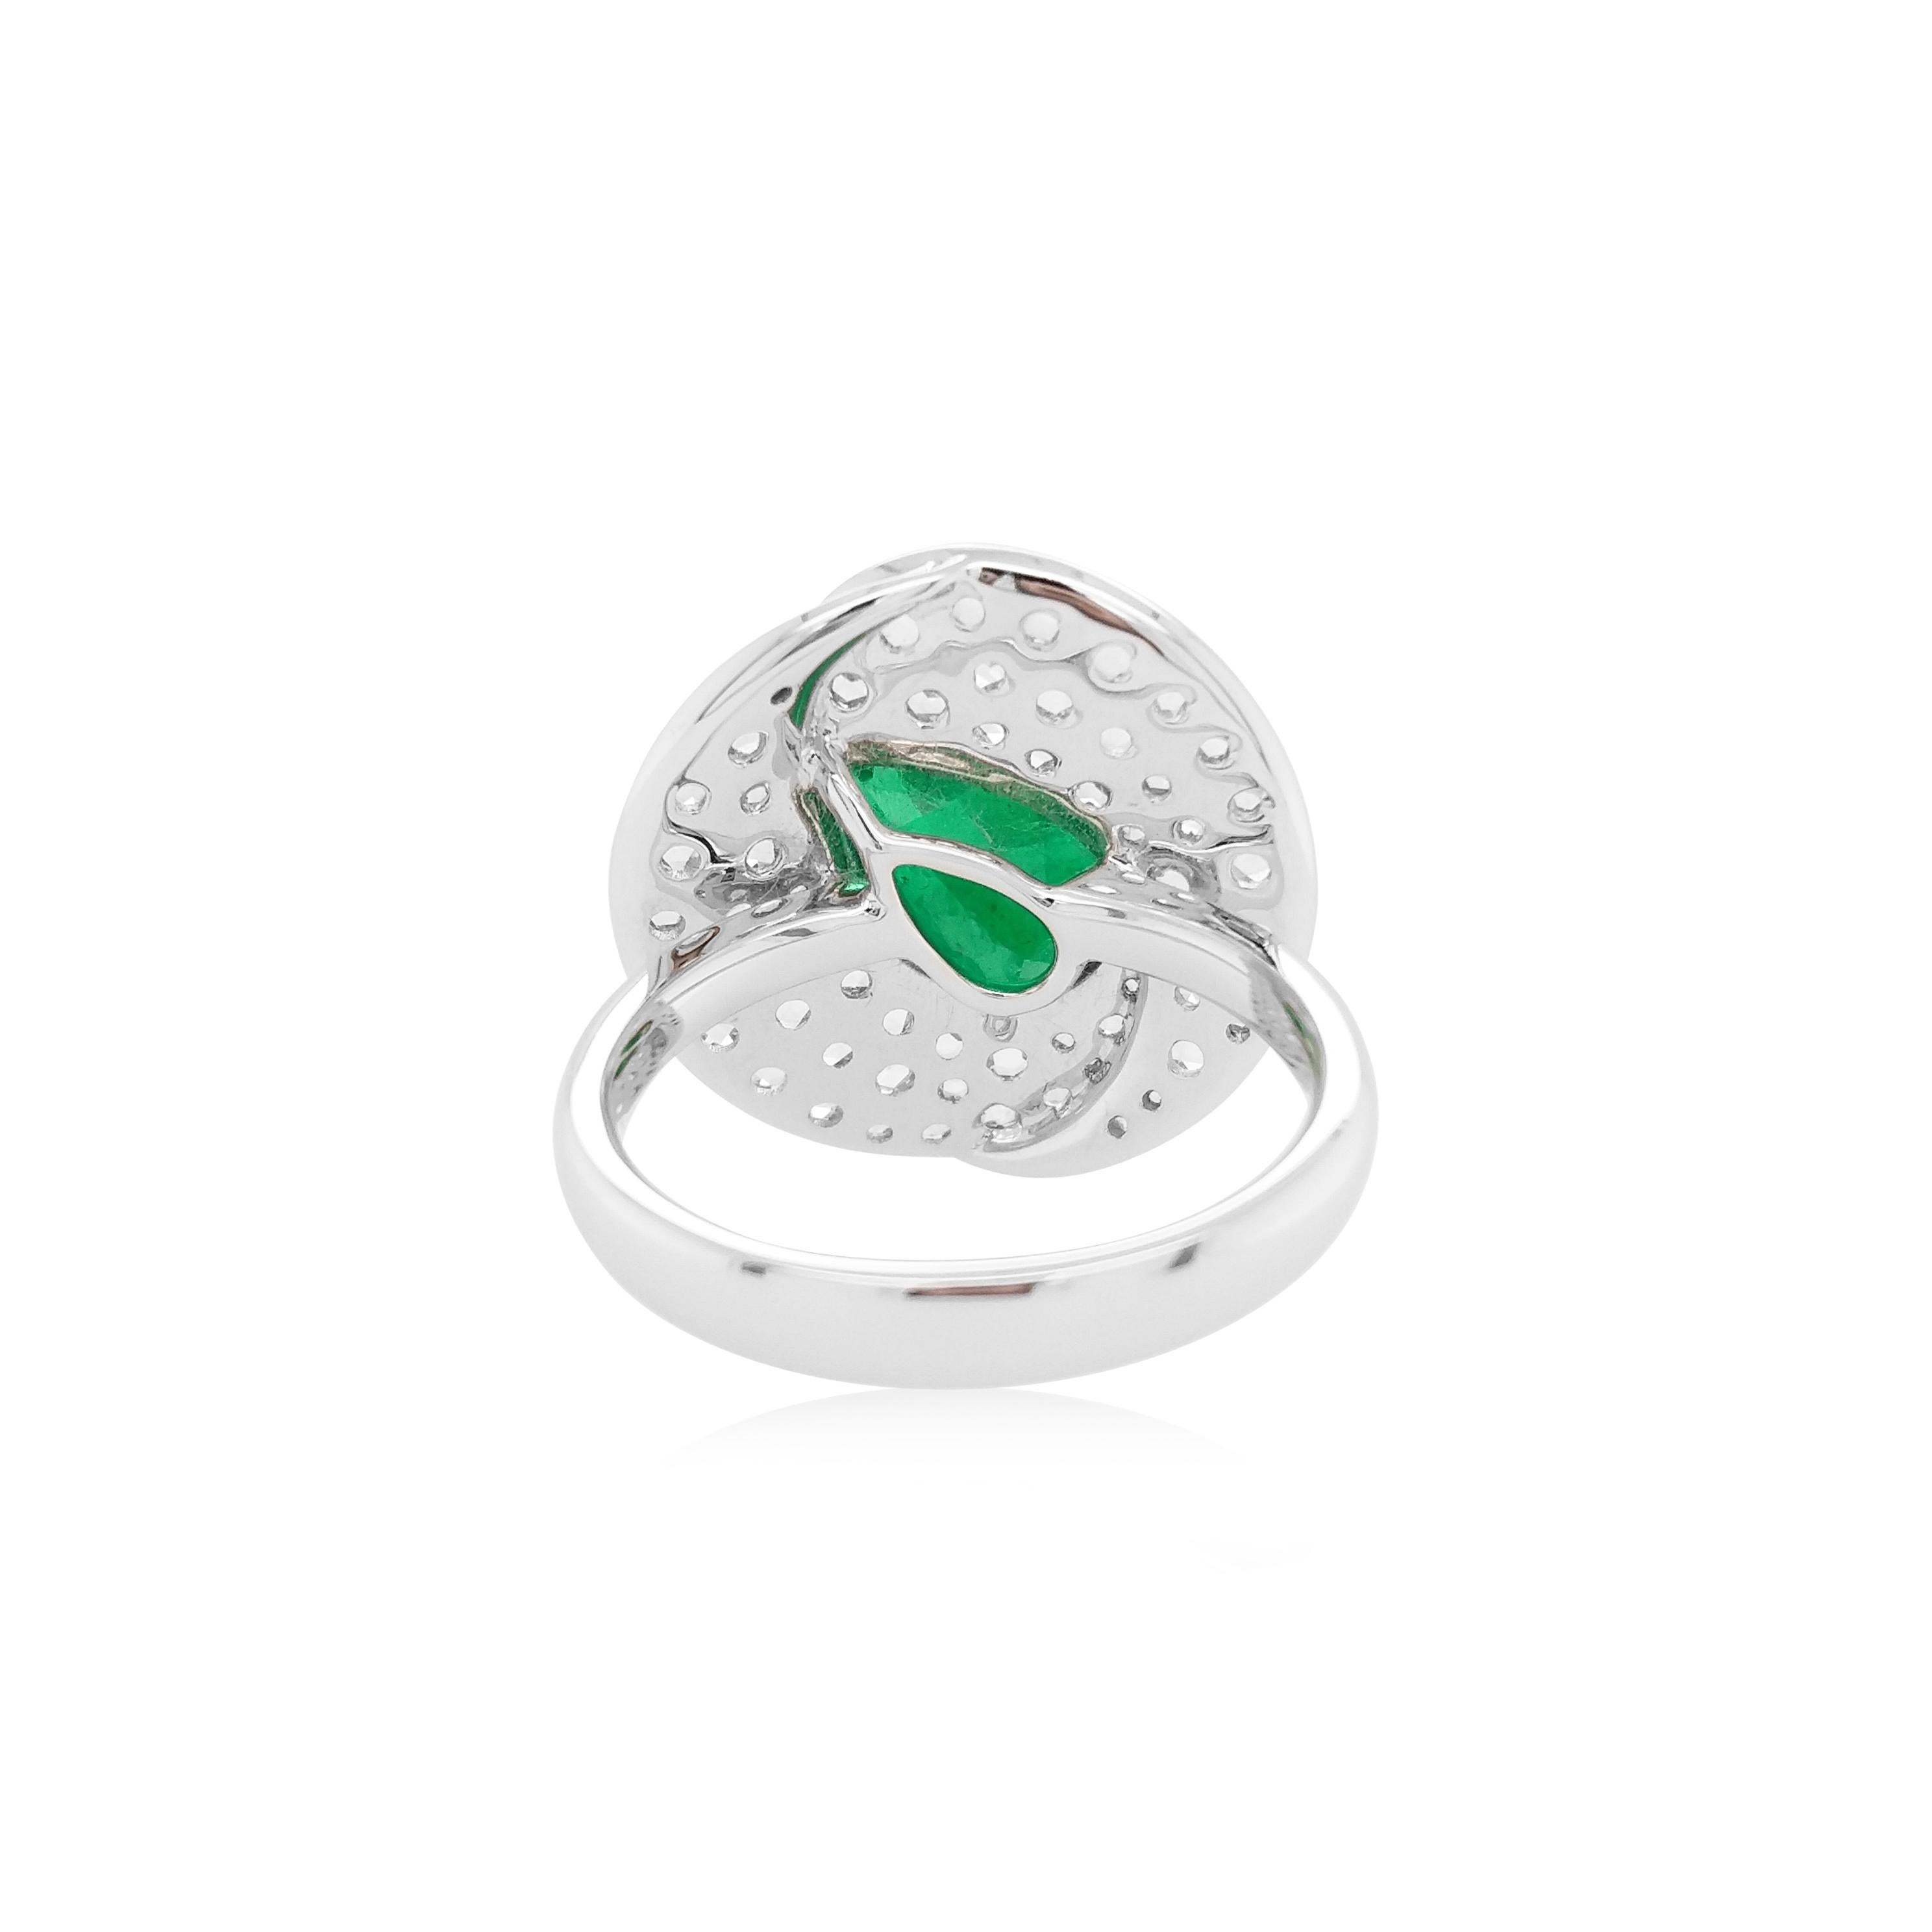 This contemporary ring features a vibrant pear-shaped Colombian Emerald at its centre, with a delicate arrangement of rose-cut white diamond surrounding it. Set in 18 Karat white gold to enrich the spectacular hues of the emerald and the sparkle of